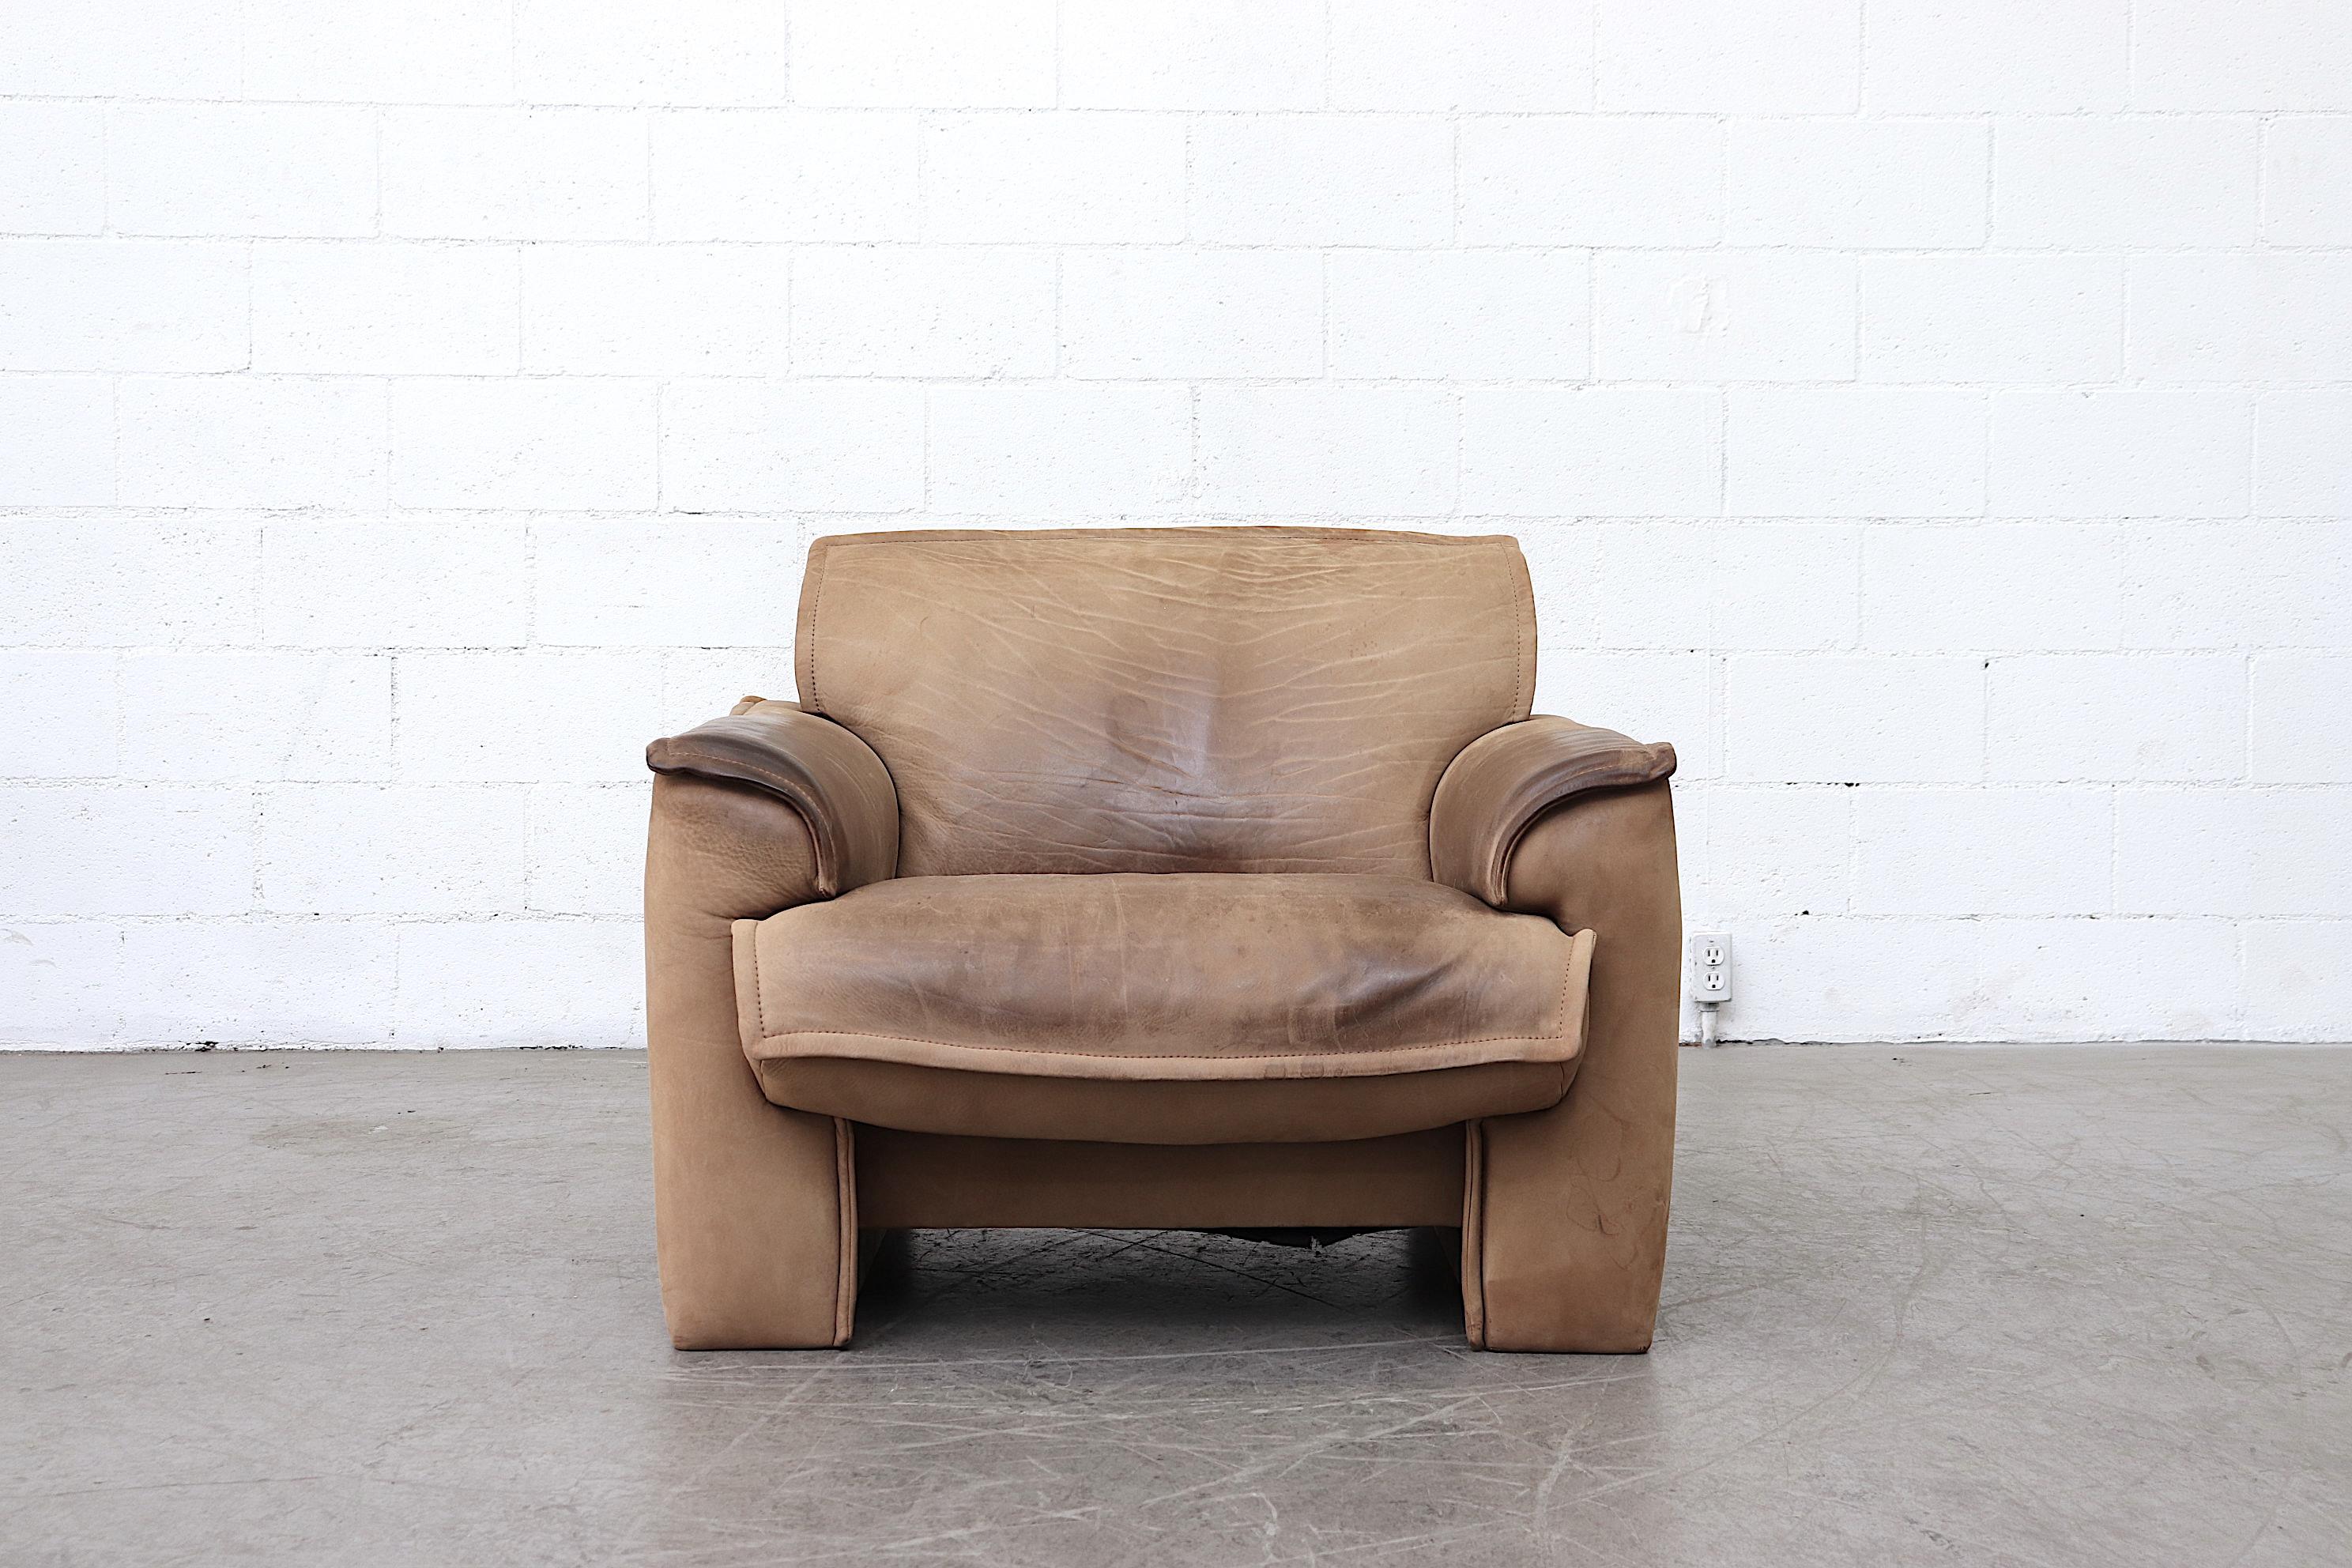 Natural buffalo leather Leolux lounge chair in very original condition with visible wear to leather consistent with age and use. Hefty chair with heavy patina.